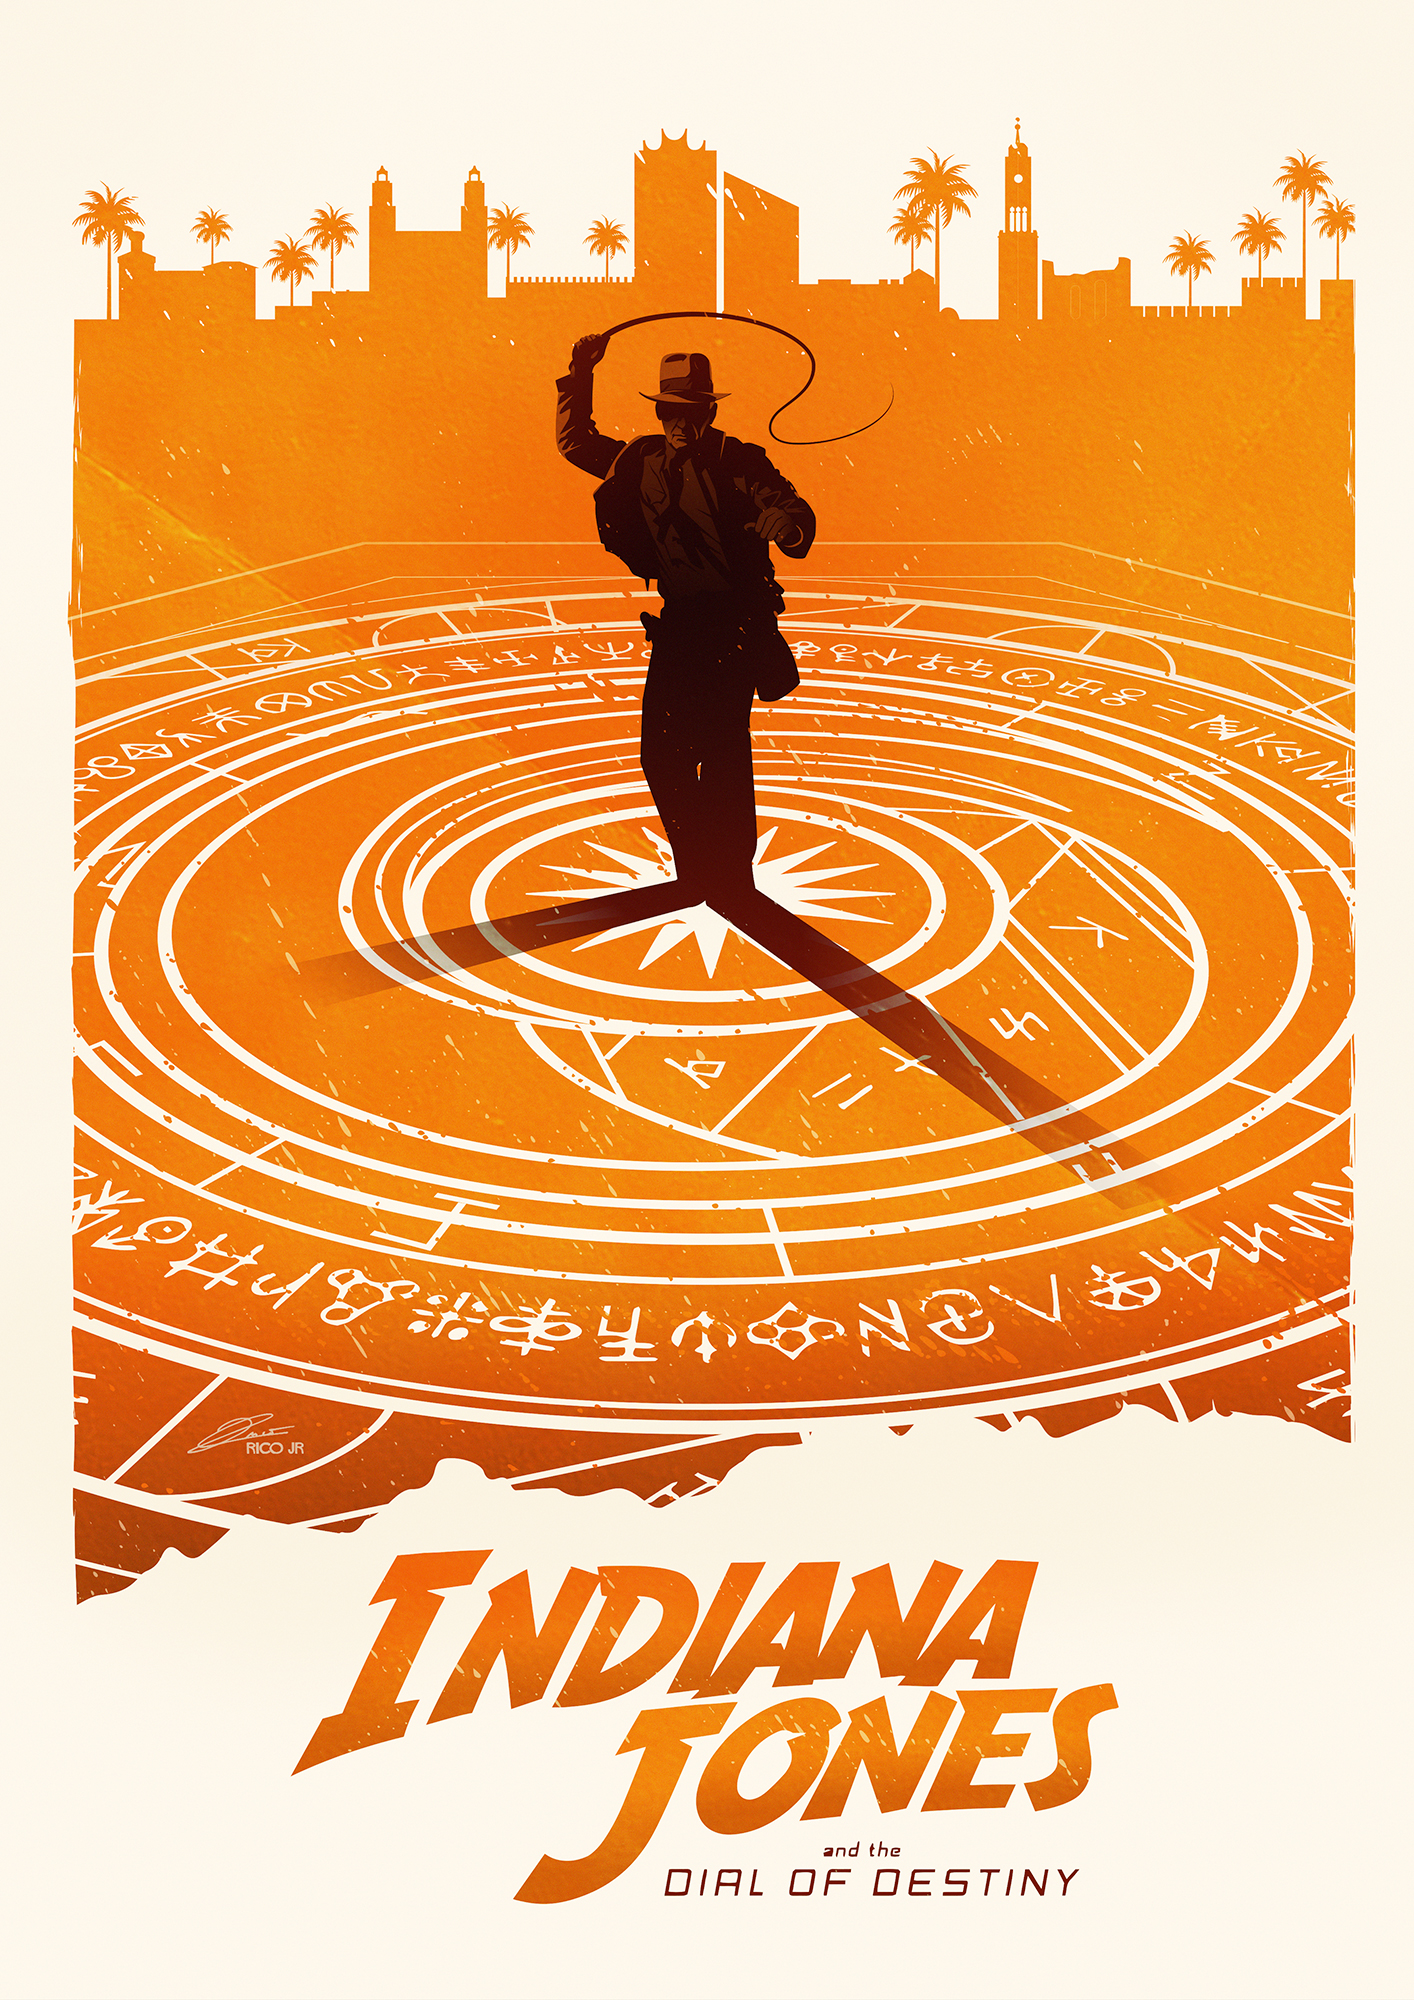 INDIANA JONES AND THE DIAL OF DESTINY Poster Art